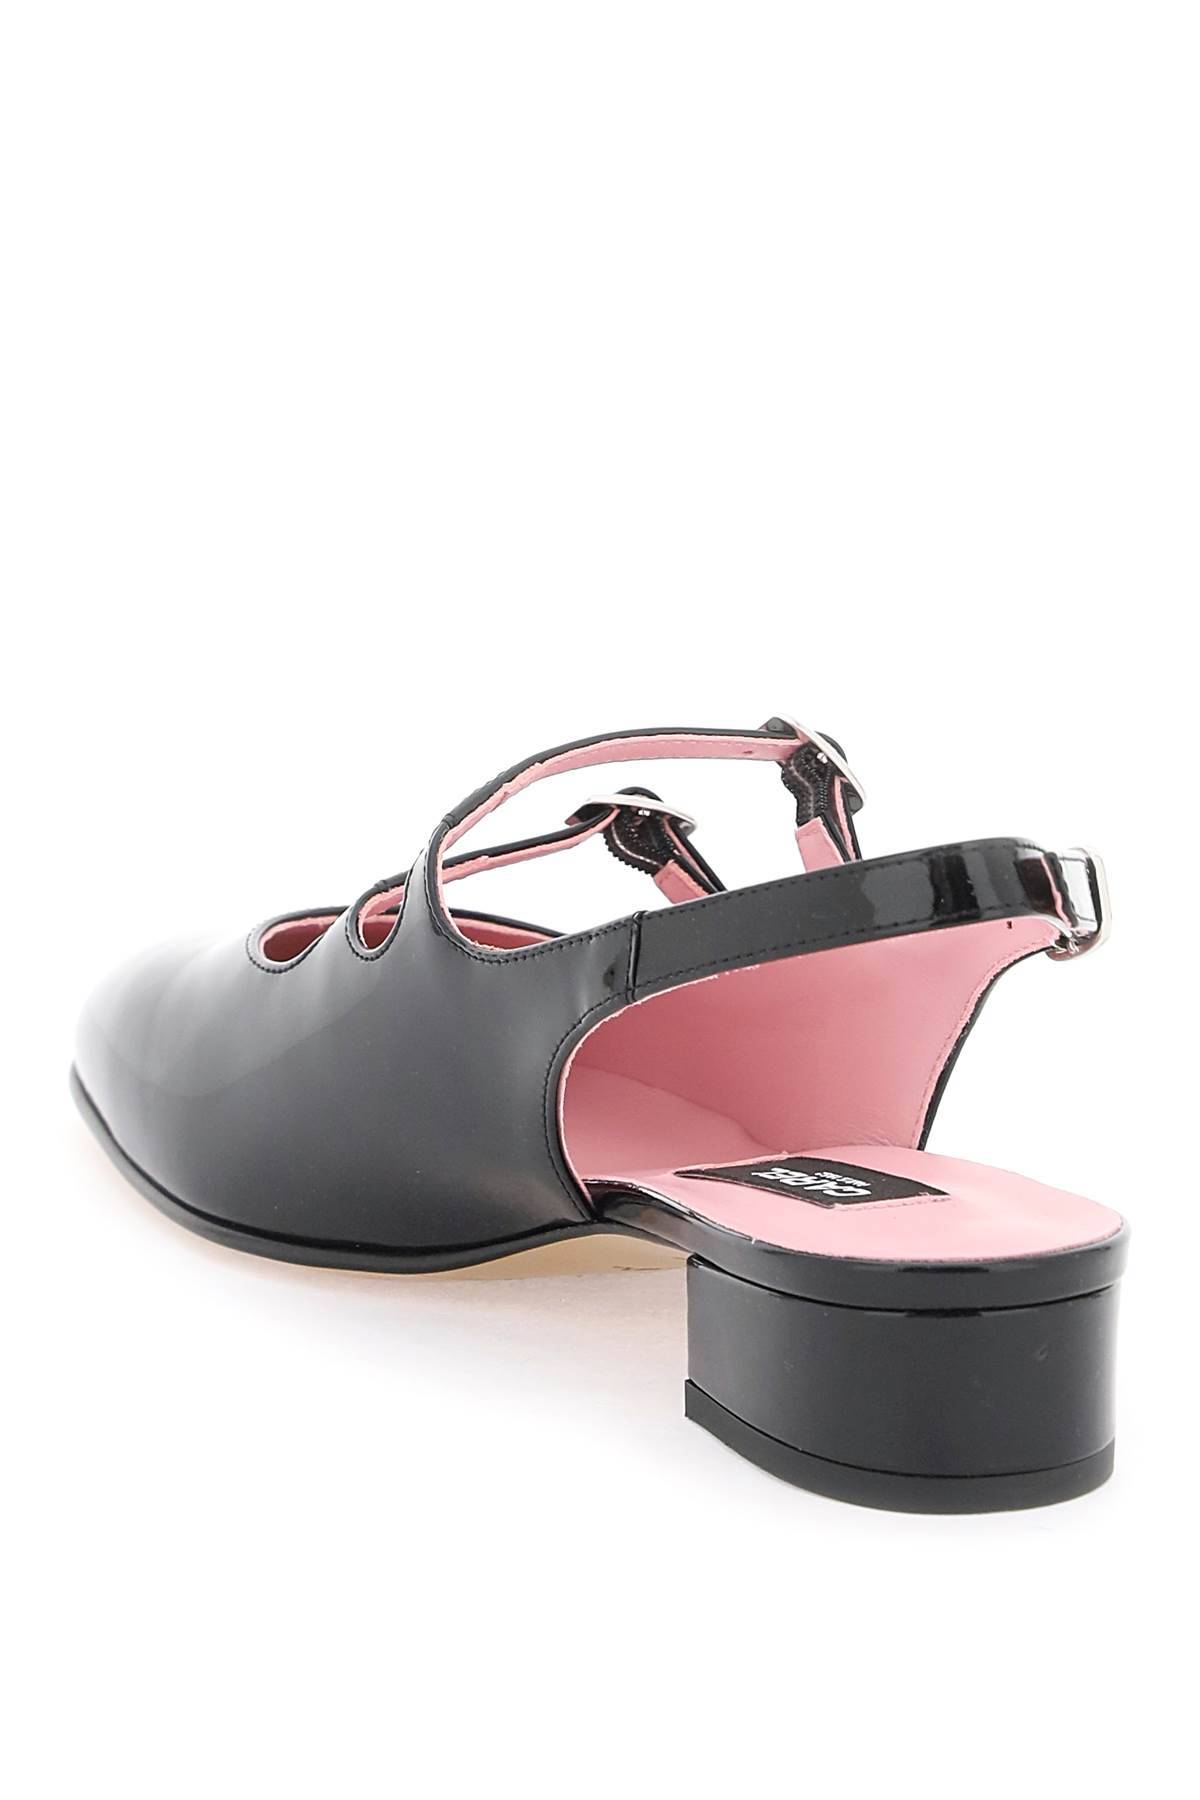 Shop Carel Patent Leather Pêche Slingback Mary Jane In Black